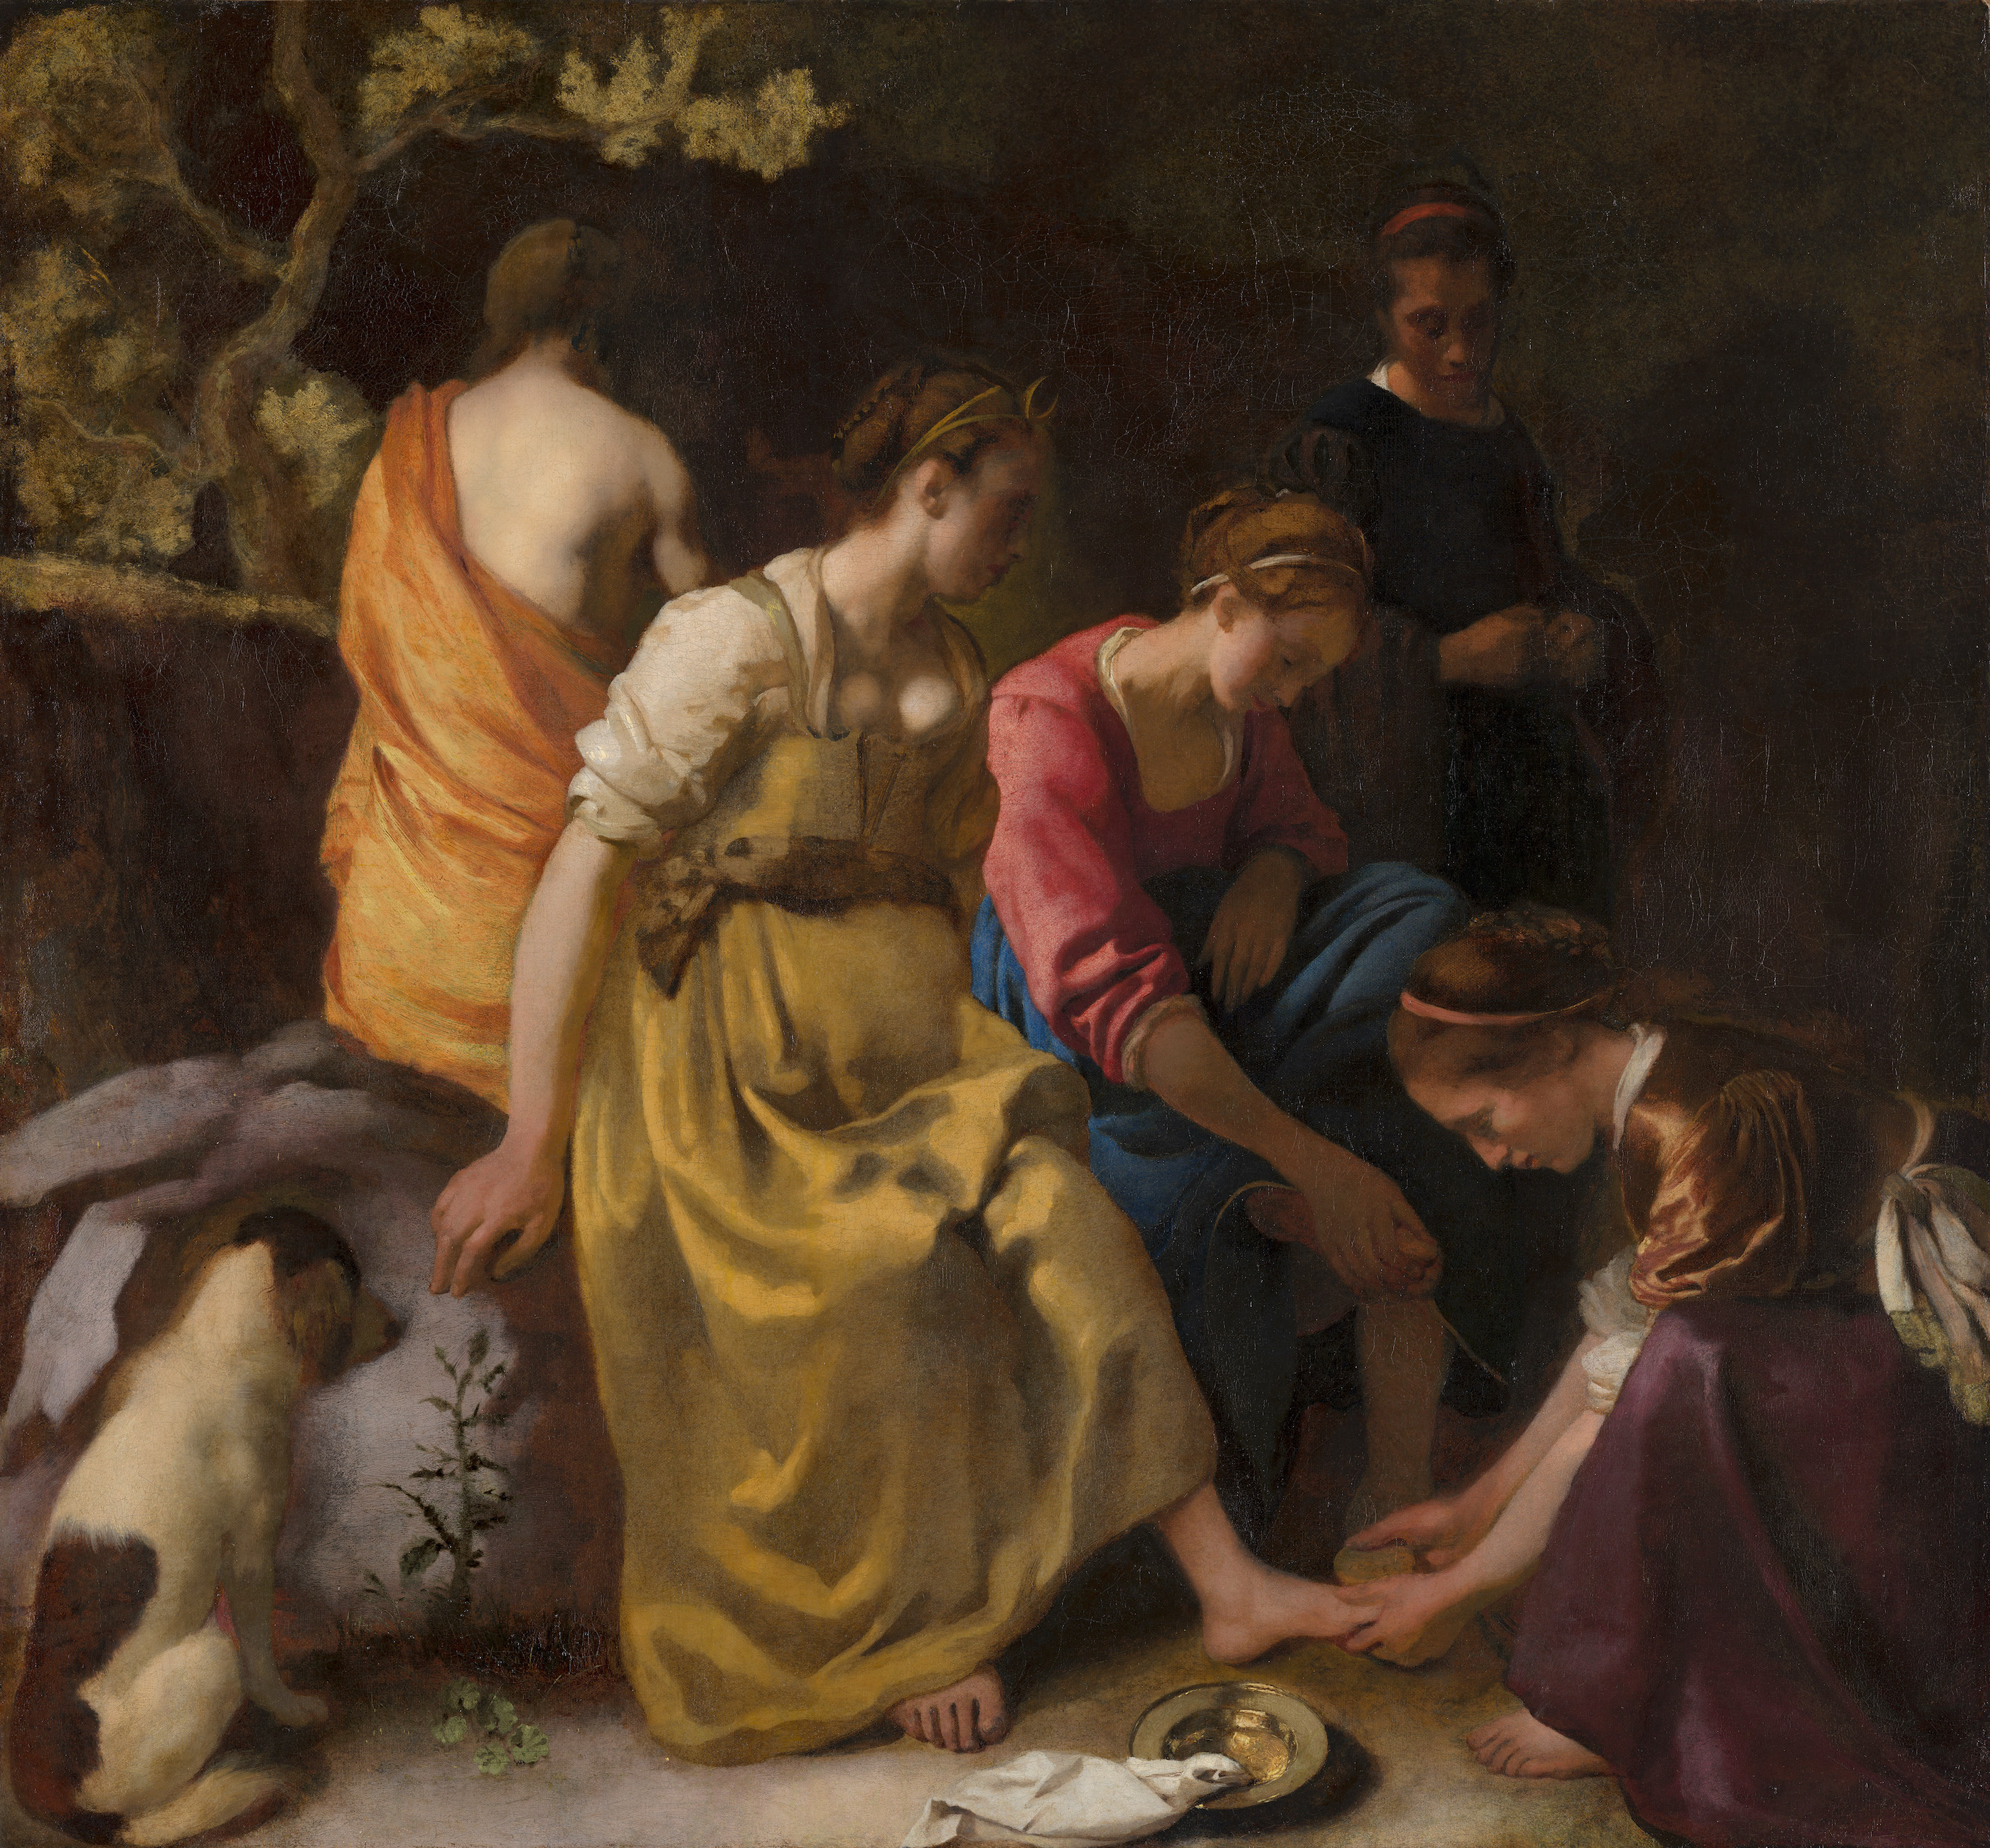 Diana and Her Nymphs by Johannes Vermeer - c. 1653-1654 - 97.8 x 104.6 cm Mauritshuis, The Hague